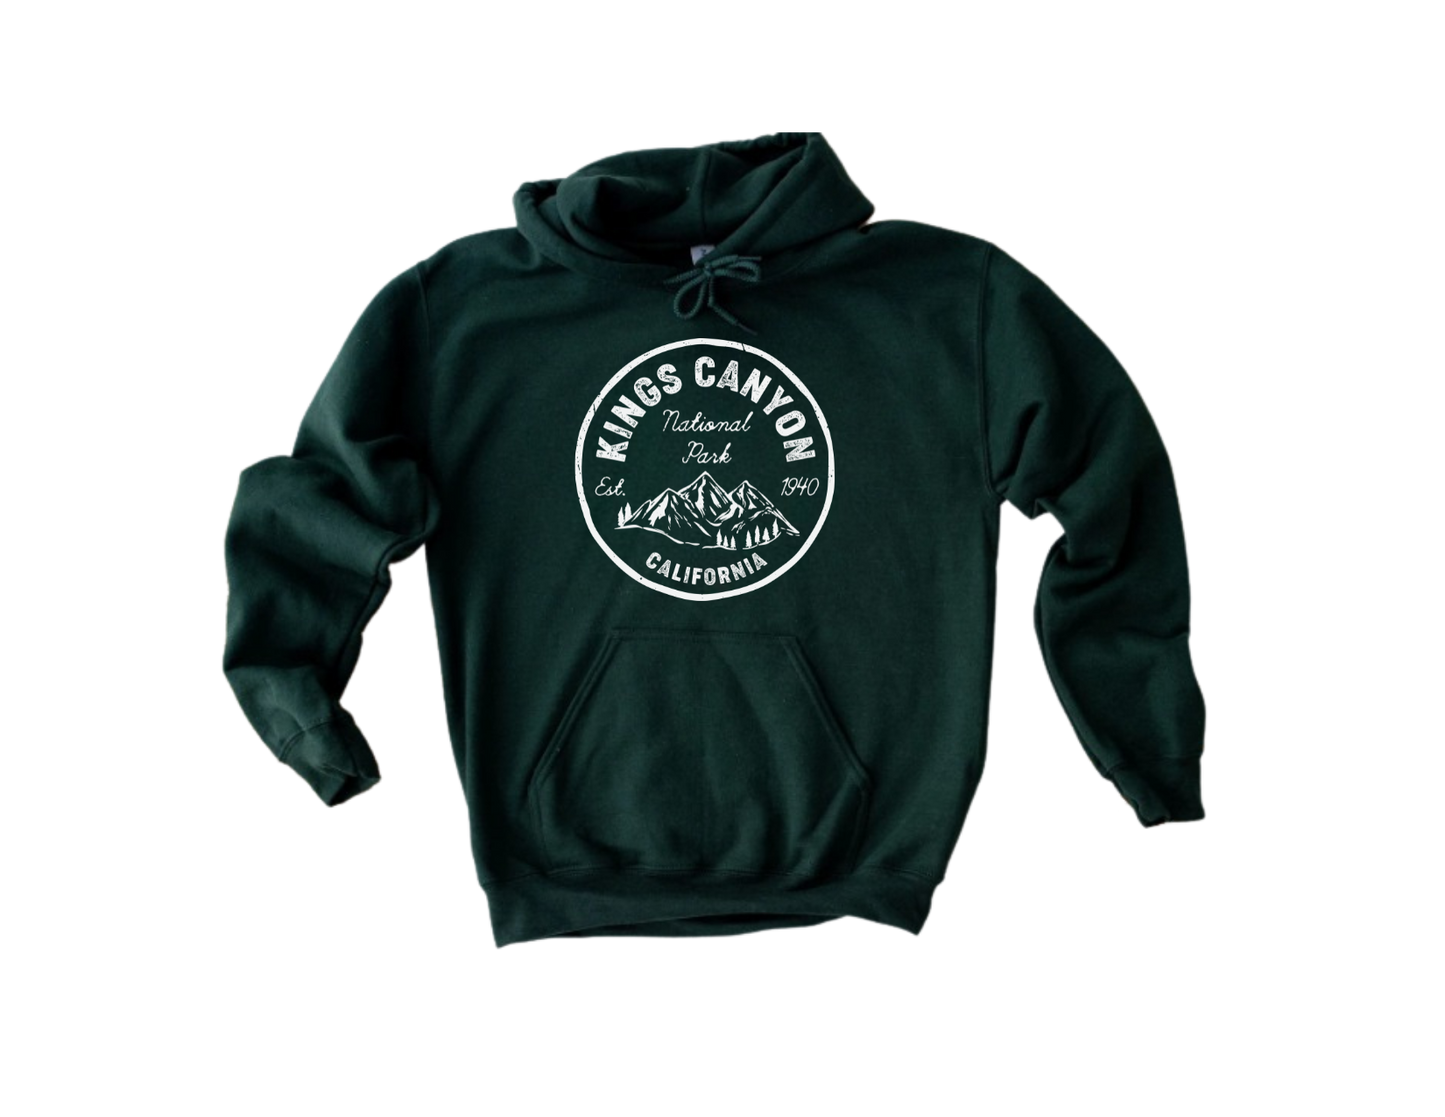 Kings Canyon National Park Unisex Hoodie